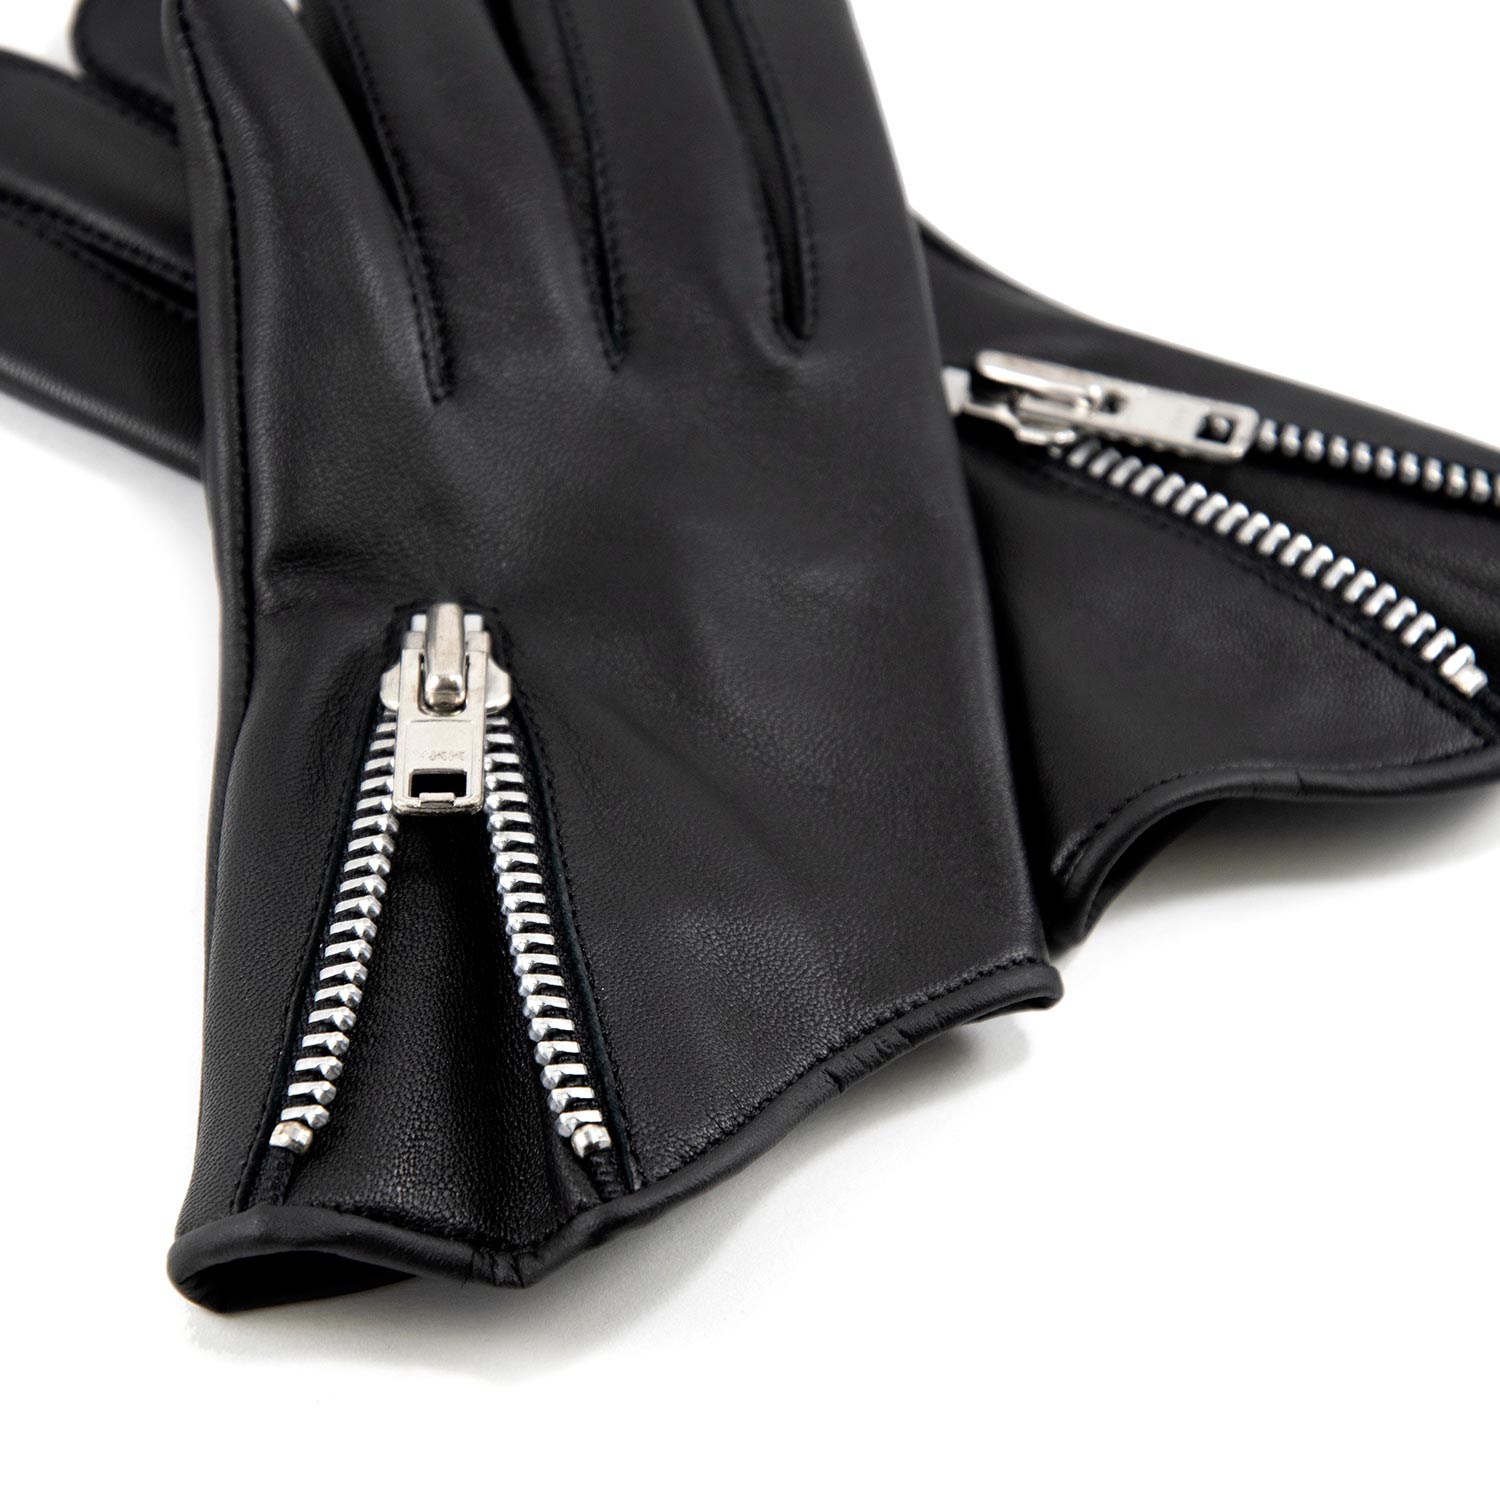 Throttle - Black and Nickel Leather Gloves